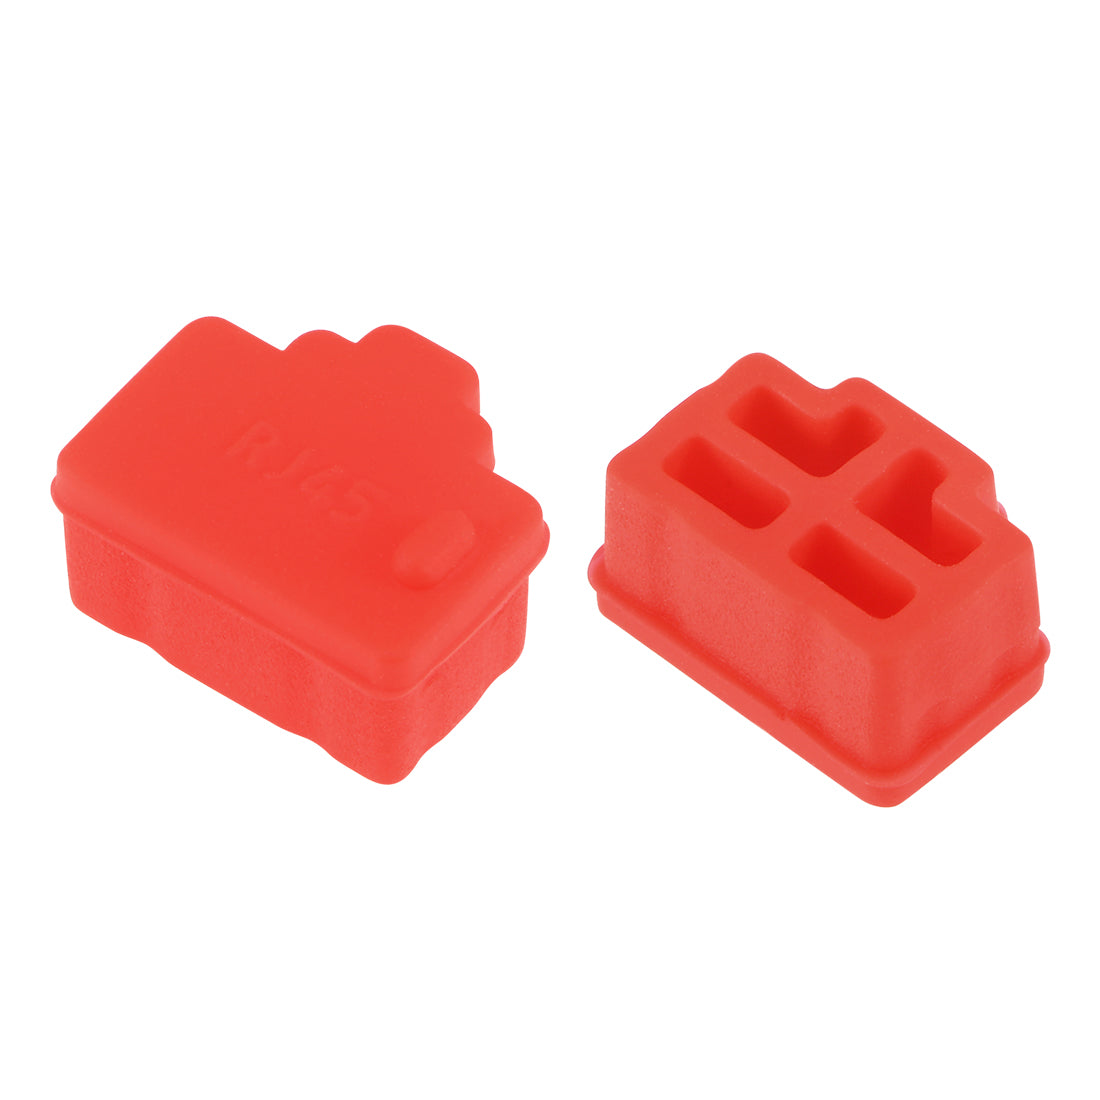 uxcell Uxcell 20pcs RJ45 Silicone Protectors Ethernet Hub Port Anti Dust Cap Cover, Red